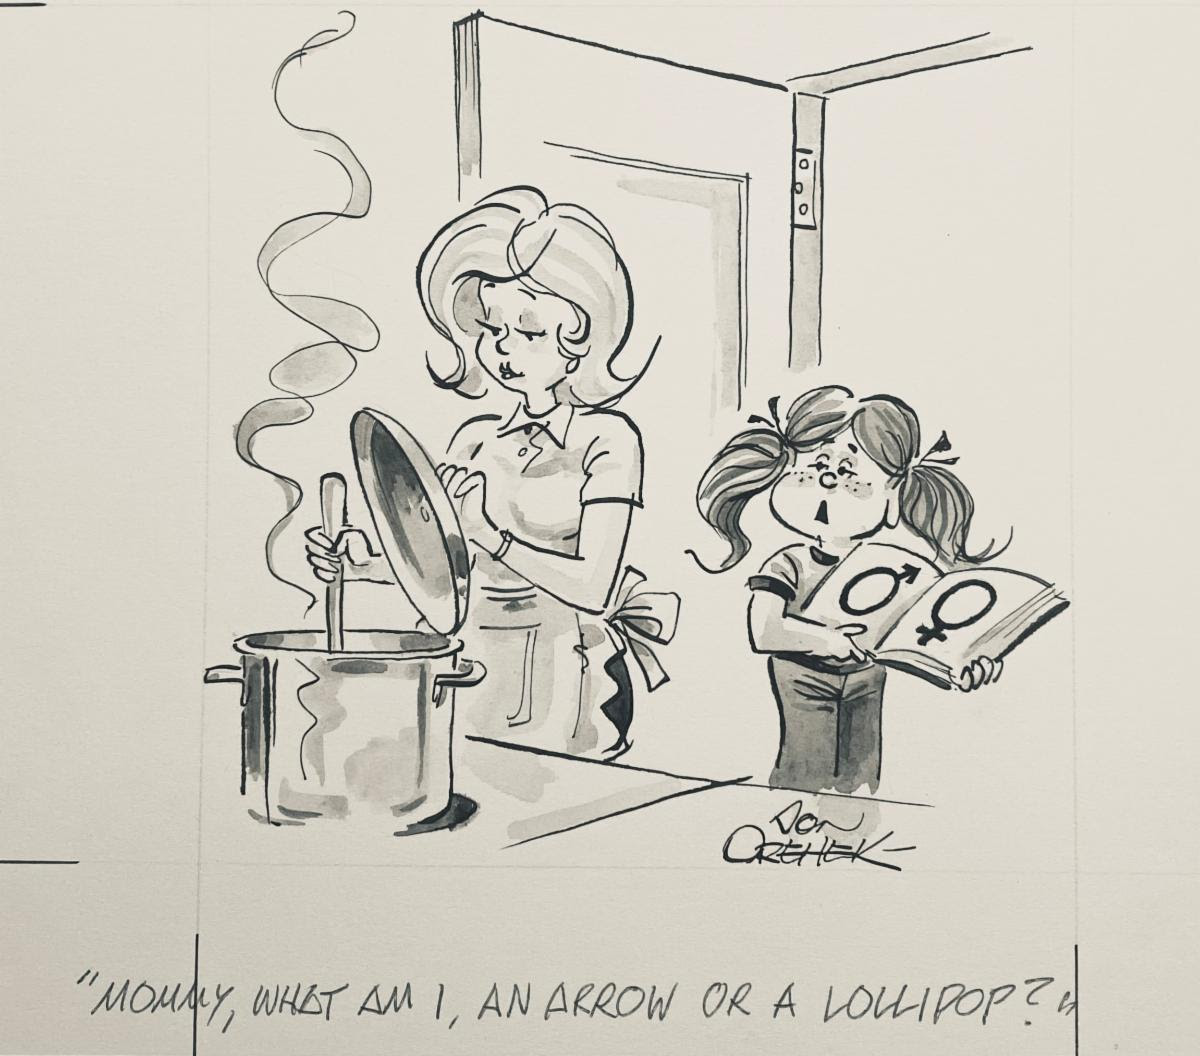 Original cartoon by Don Orehek on view at East End Arts Gallery